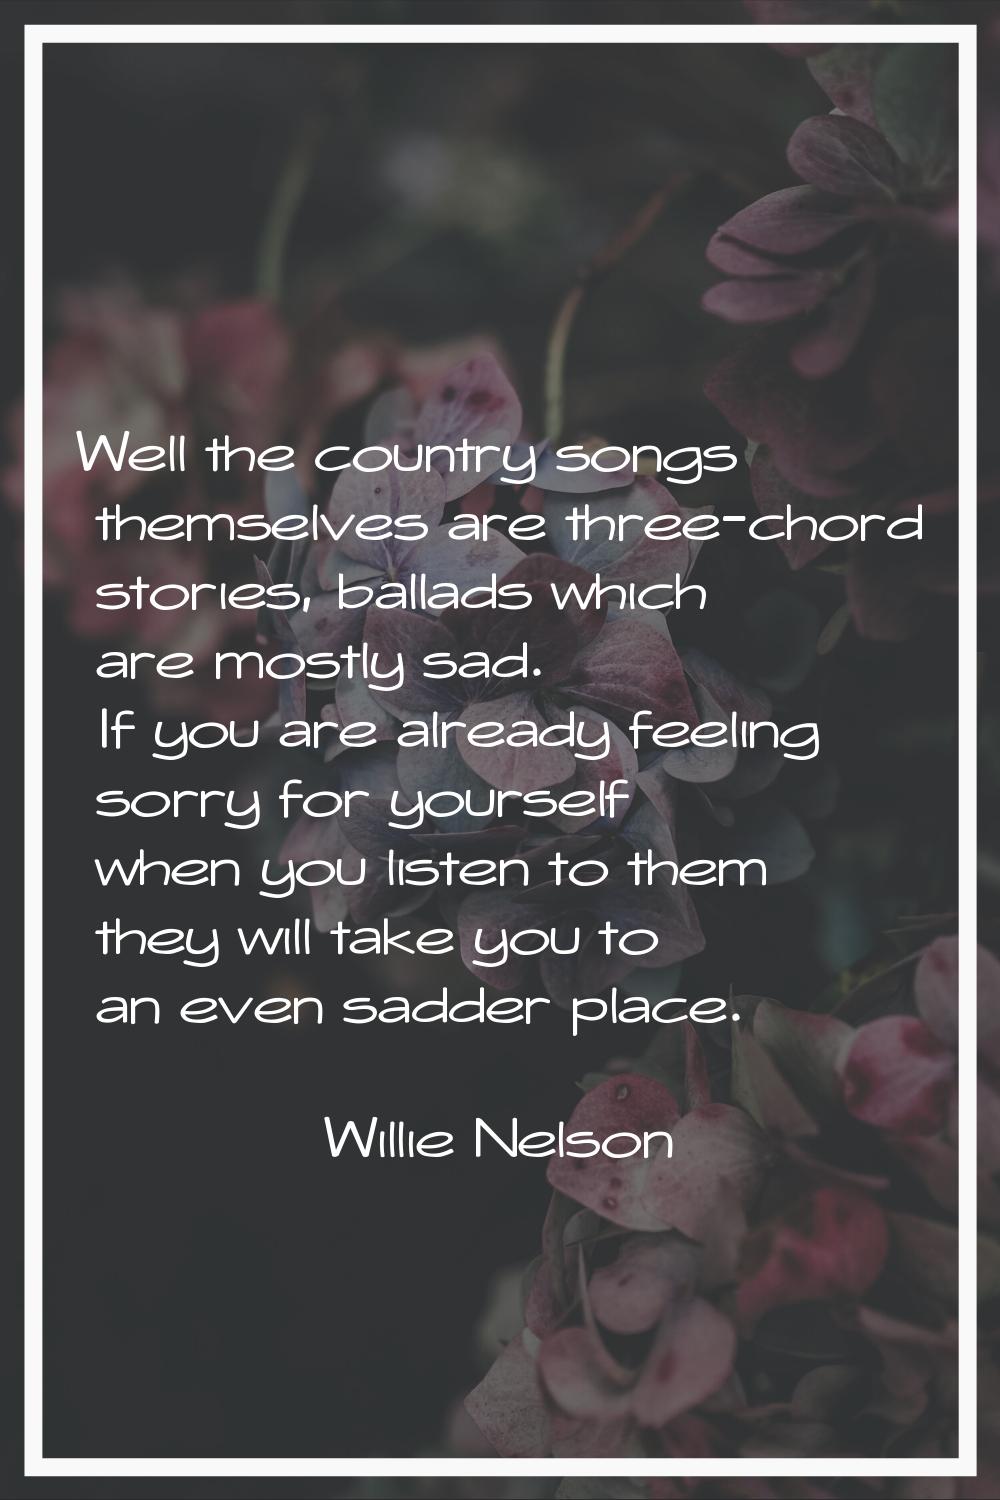 Well the country songs themselves are three-chord stories, ballads which are mostly sad. If you are